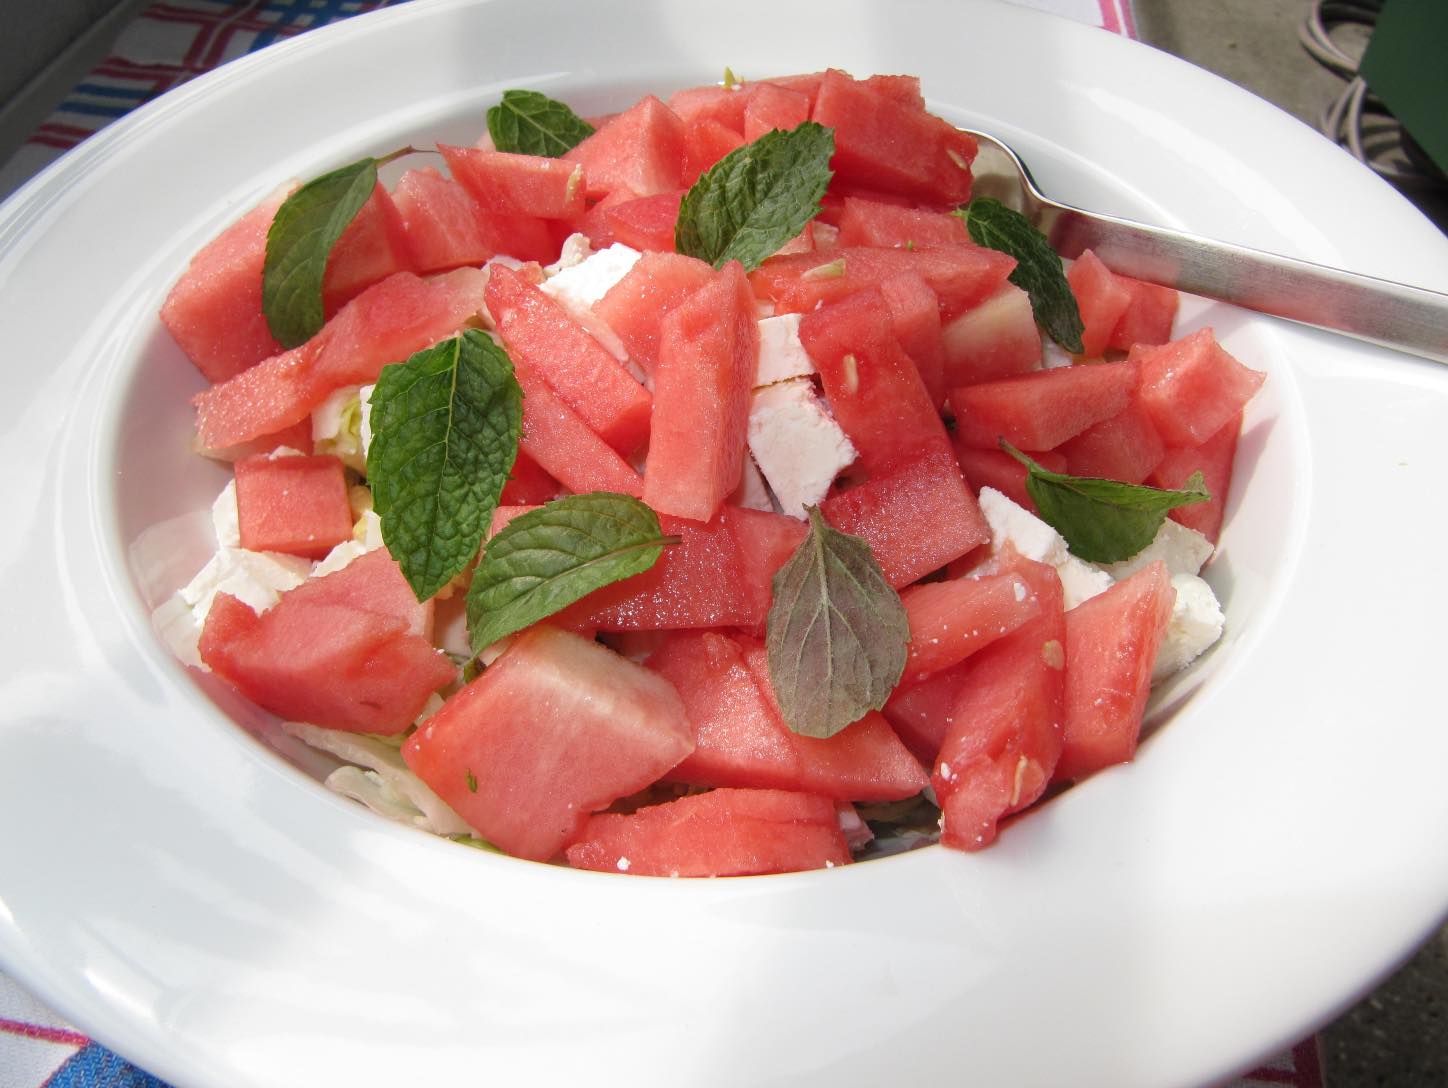 Jean Trebek's summer Watermelon Salad Recipe is inspired by a dish from her son Matthew's restaurant's, Oso, NY. A perfect cool and refreshing summertime treat!